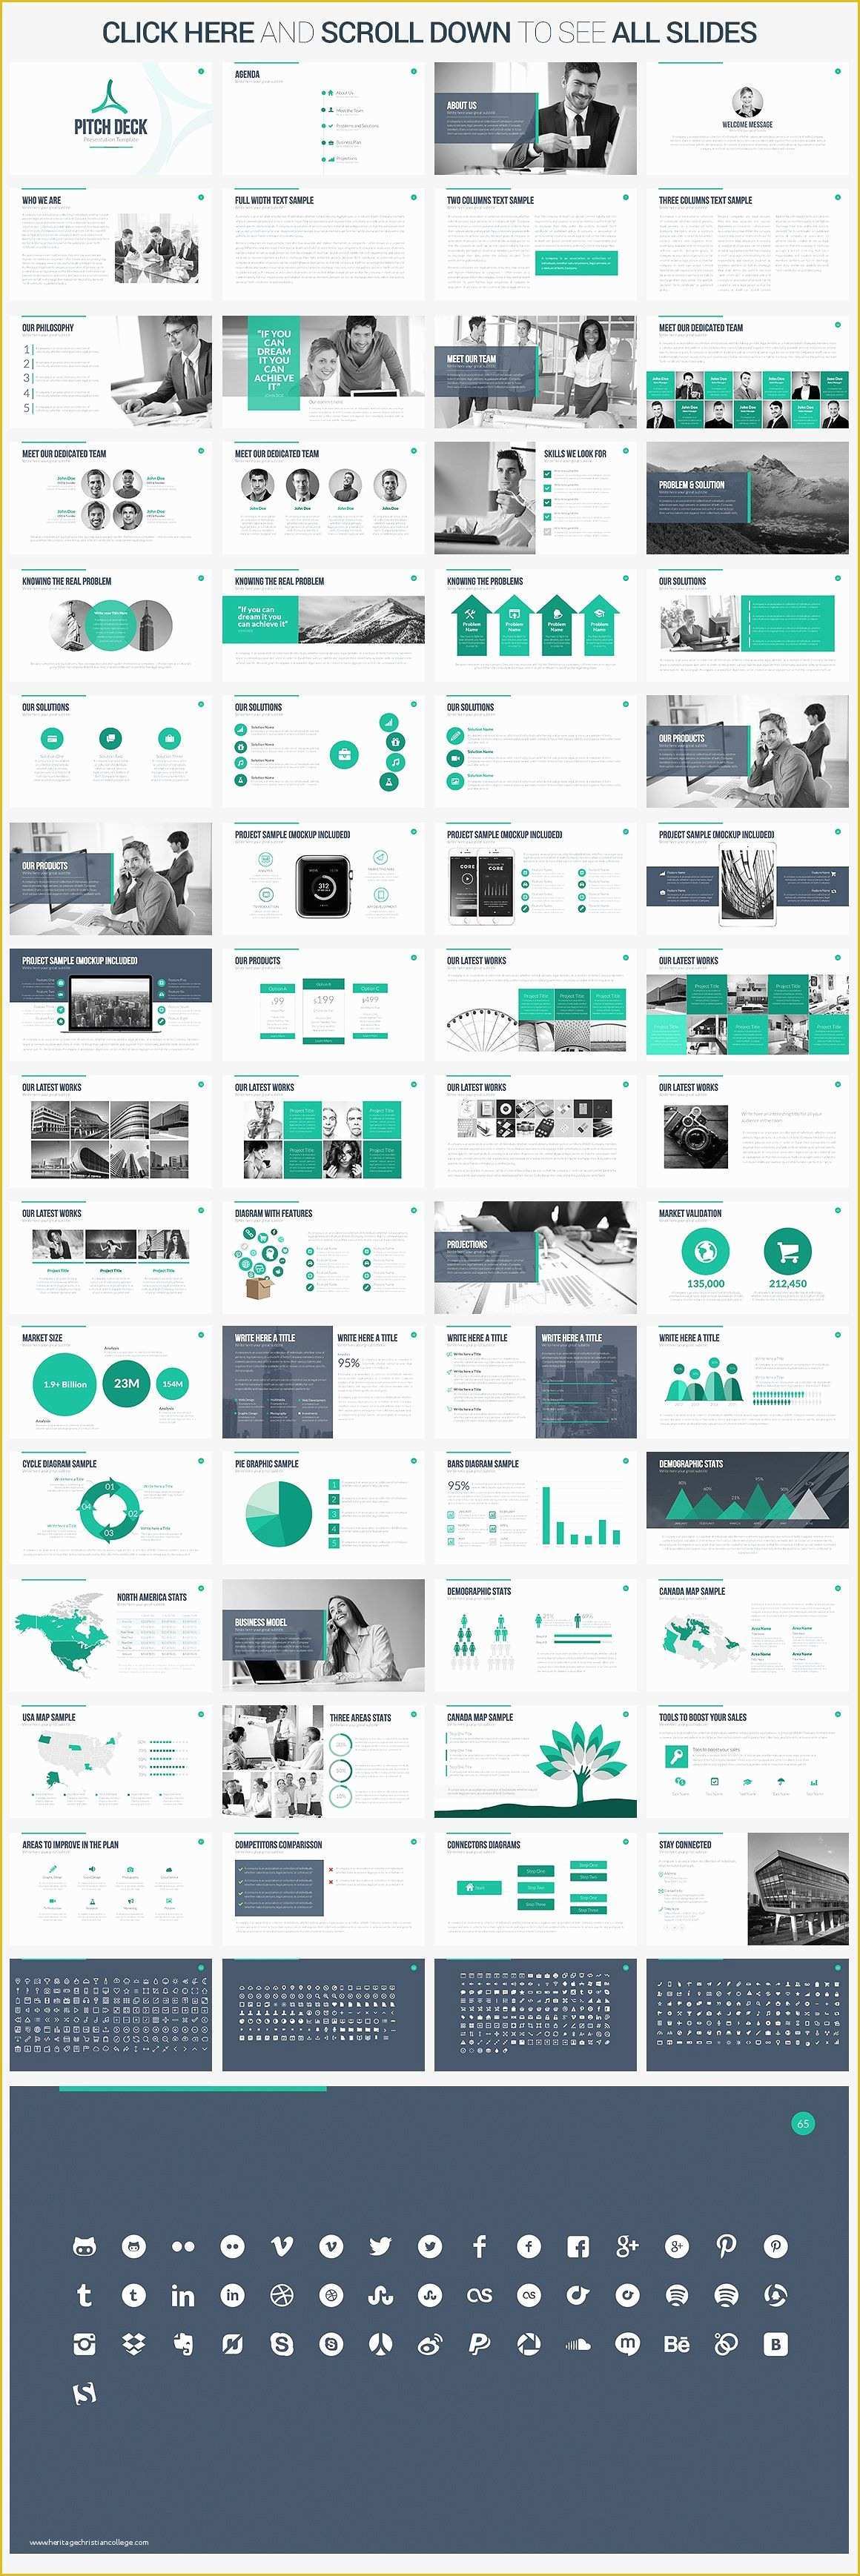 Pitch Deck Powerpoint Template Free Of Pitch Deck Powerpoint Template by Slidepro On